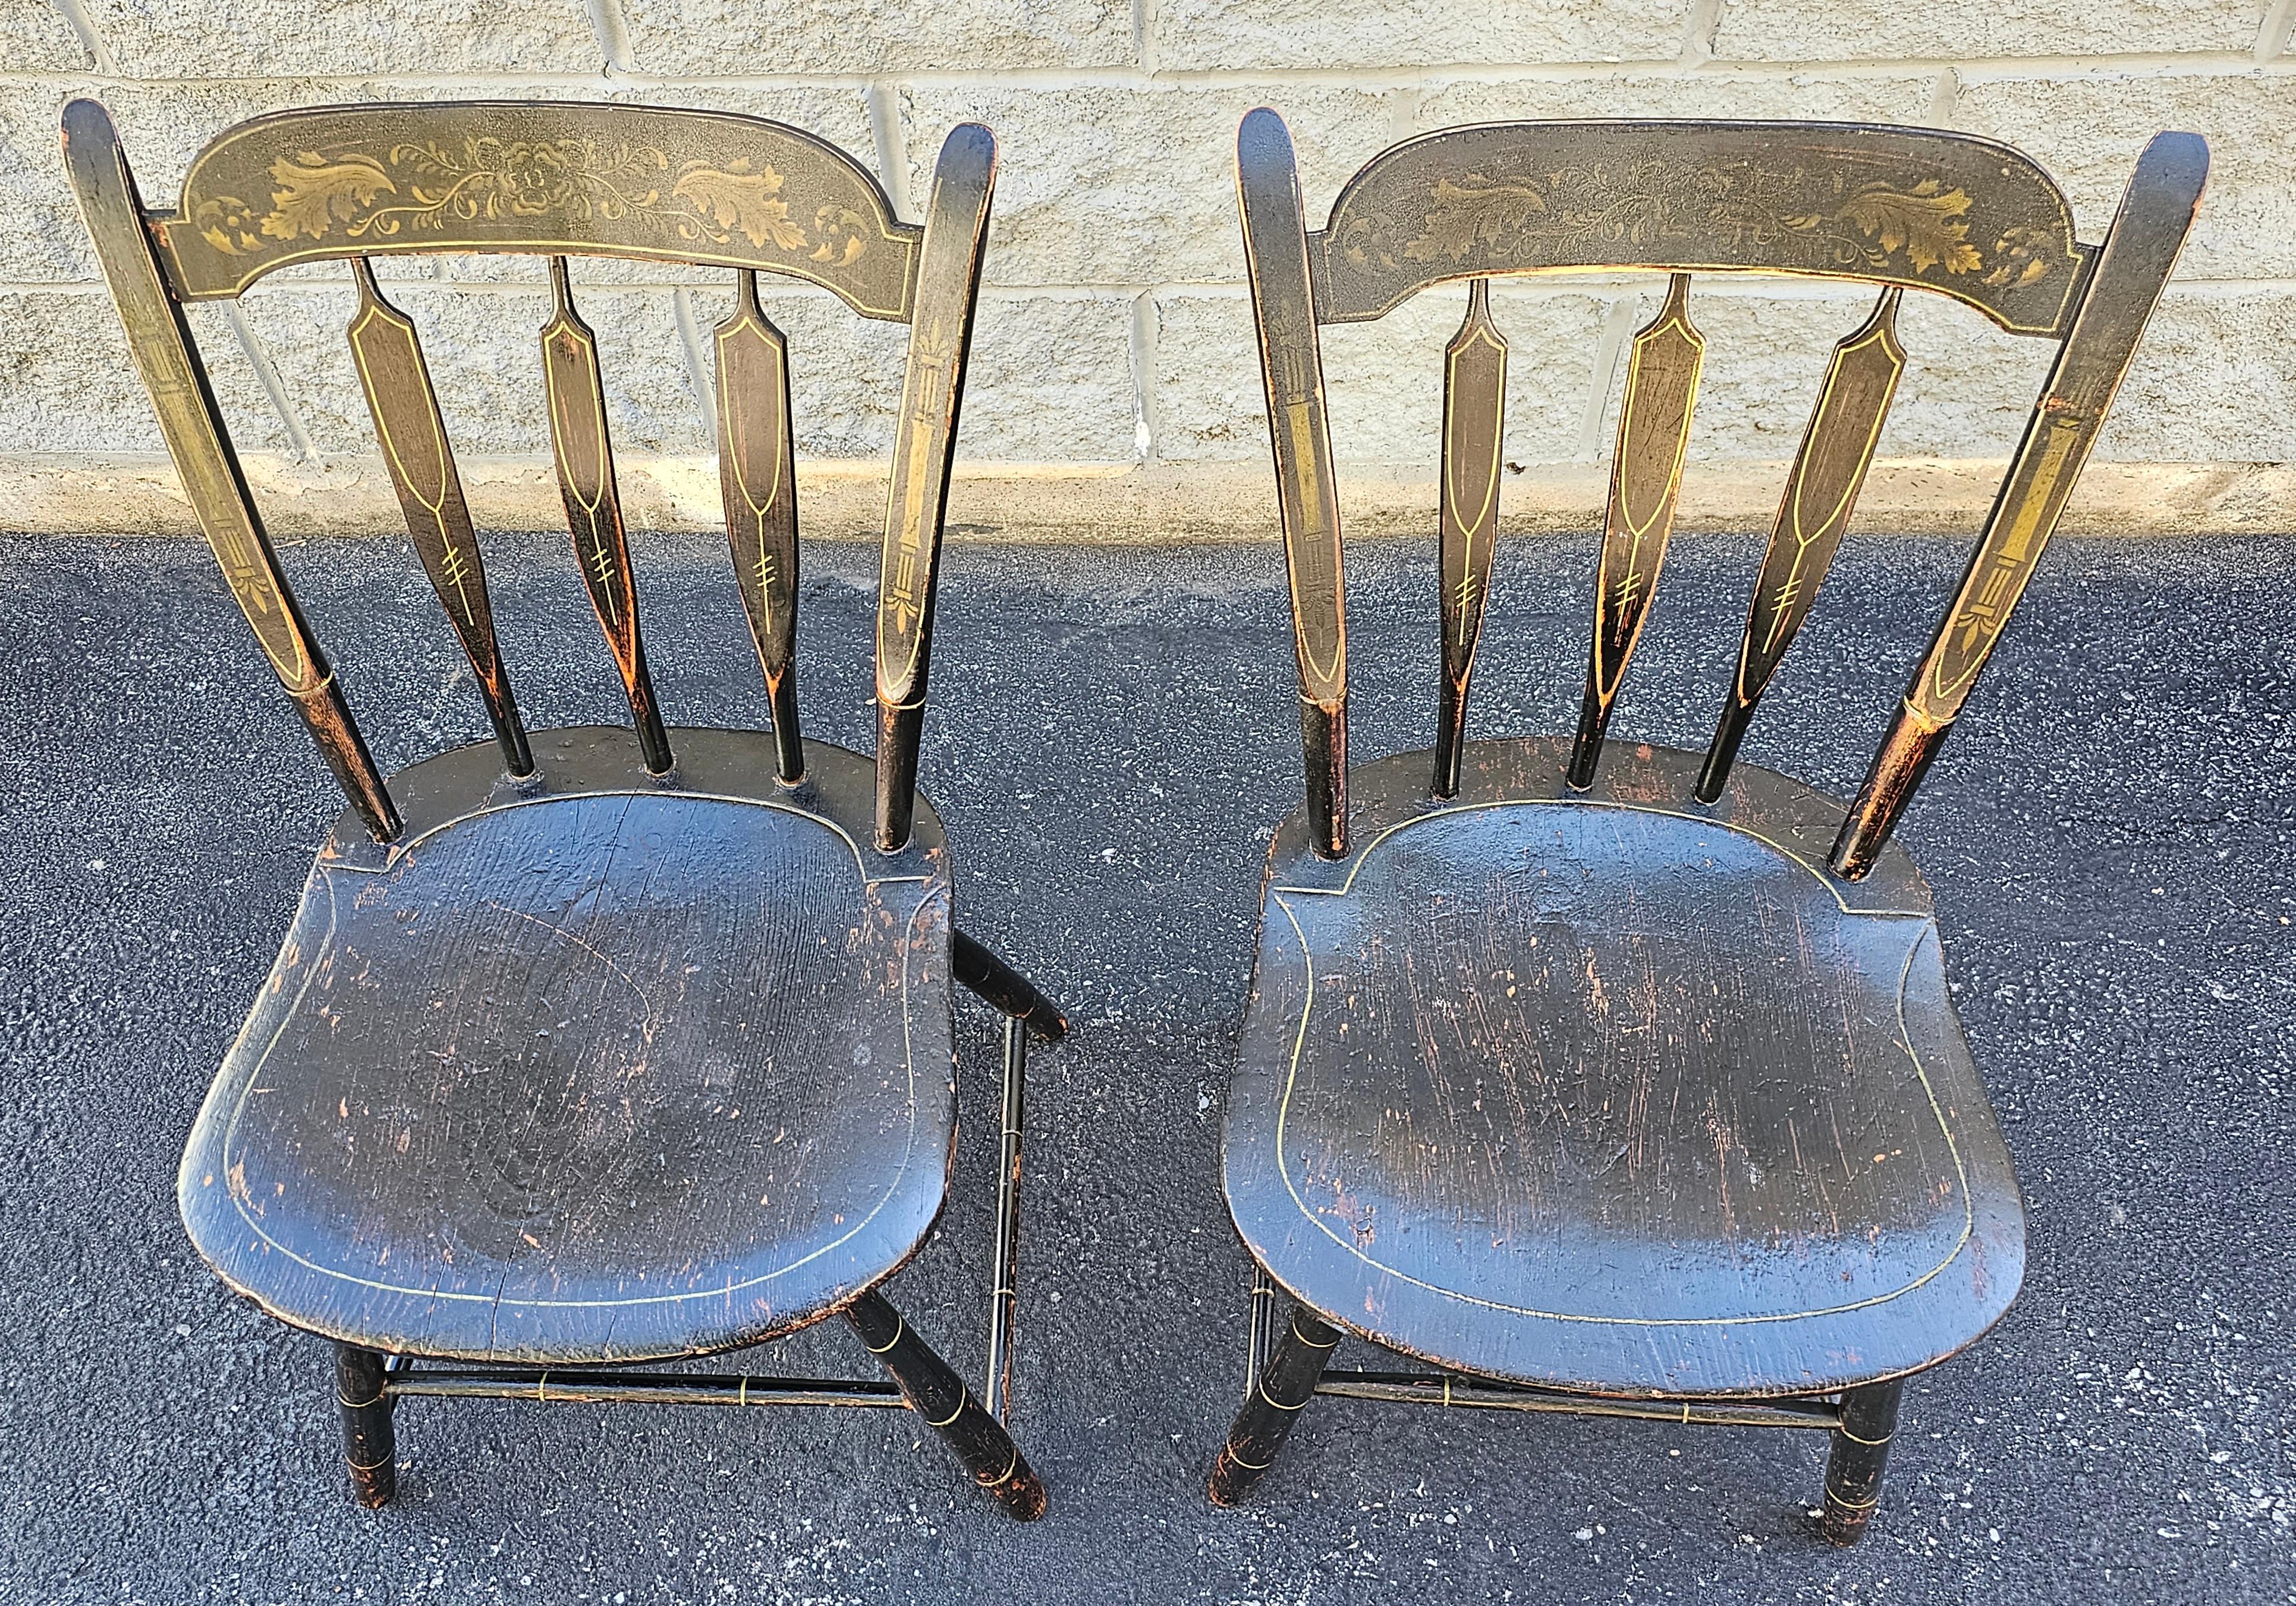 A pair of 19th Century Early American Ebonized and hand painted and decorated side chairs with great patina.
Measure 19